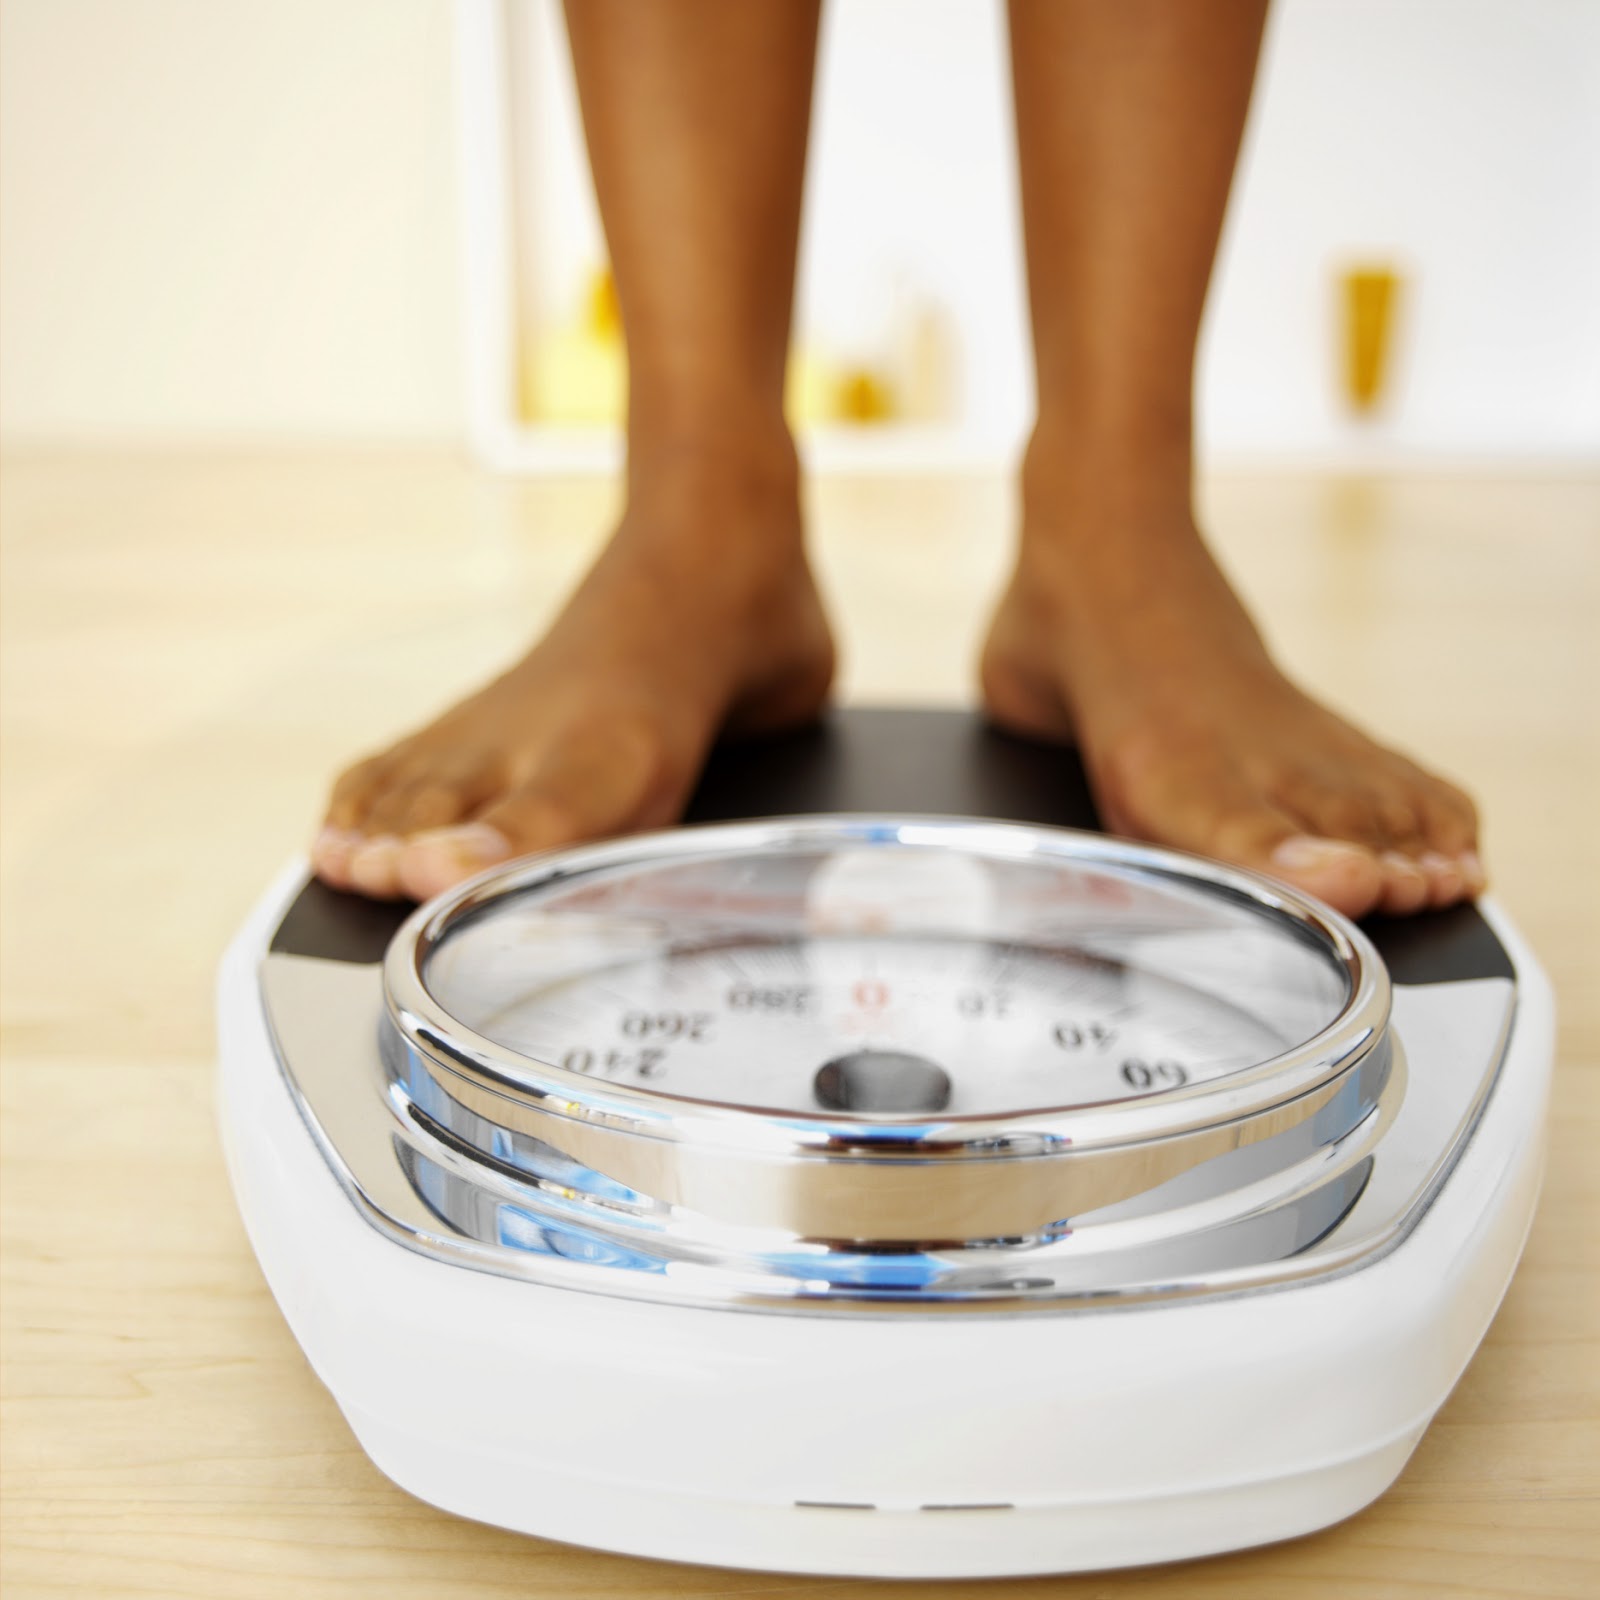 weight-loss-tactics-when-is-the-right-time-to-weigh-in-on-the-scale